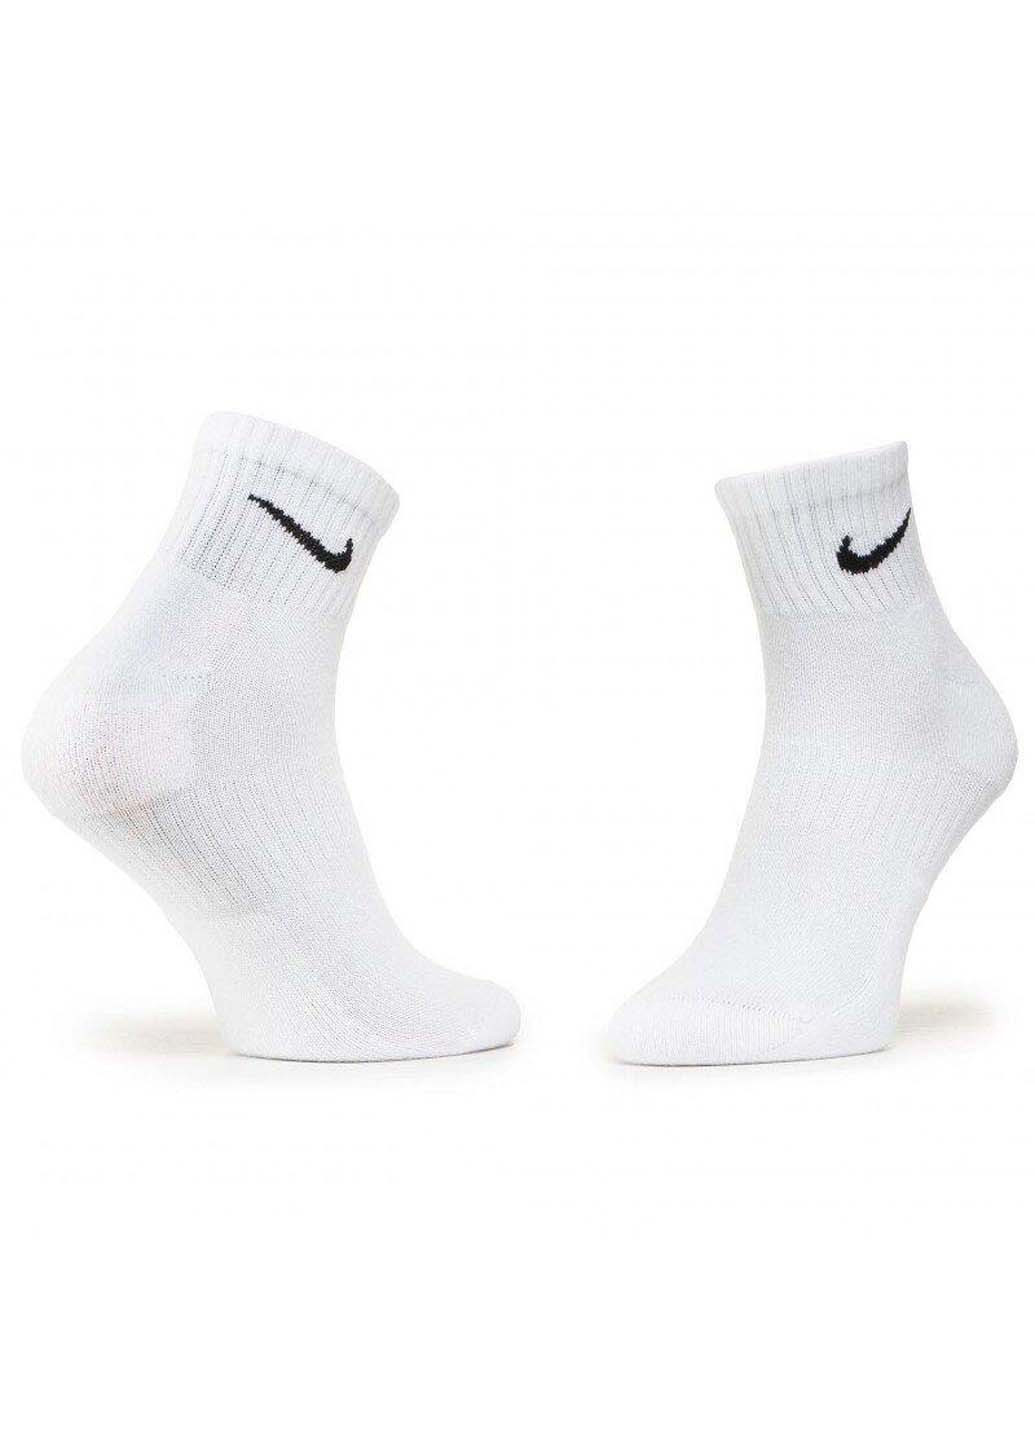 Носки Nike everyday cushion ankle 3-pack (255920513)